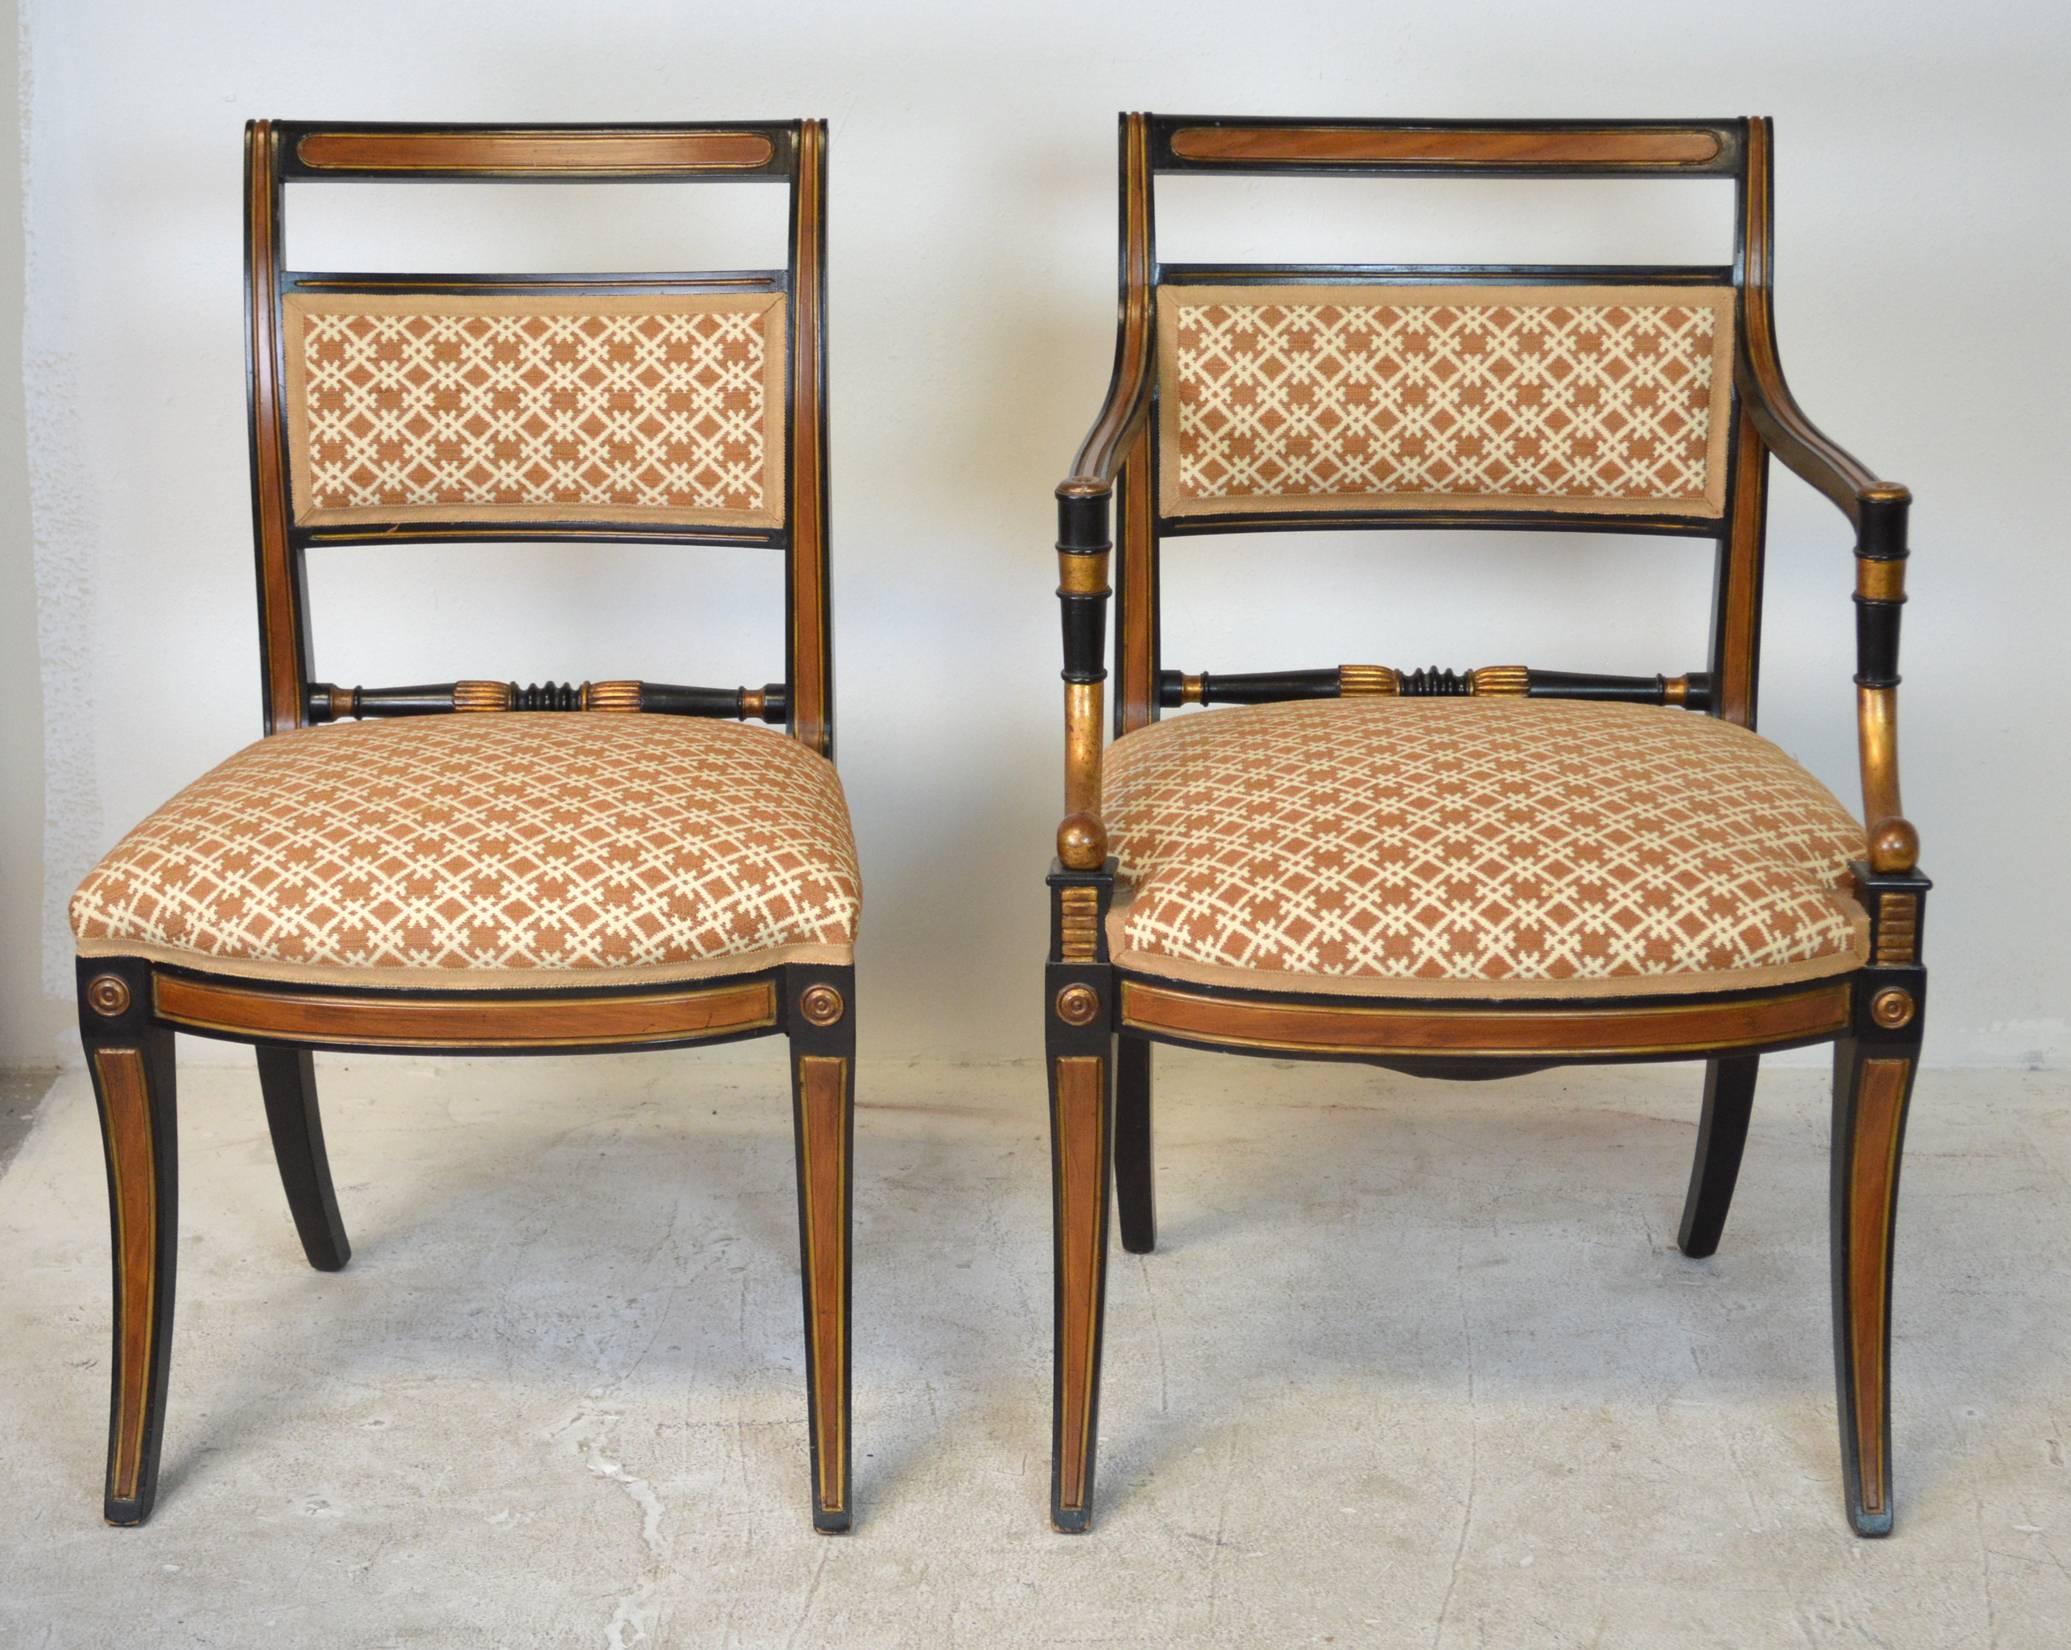 A set of four armchairs and four side chairs in the Regency style created for Parish Hadley in 1976. Traditional upholstery of springs, horsehair and hoghair.
Armchair 35 1/4" H x 23 1/4" W x 23 1/2" D.